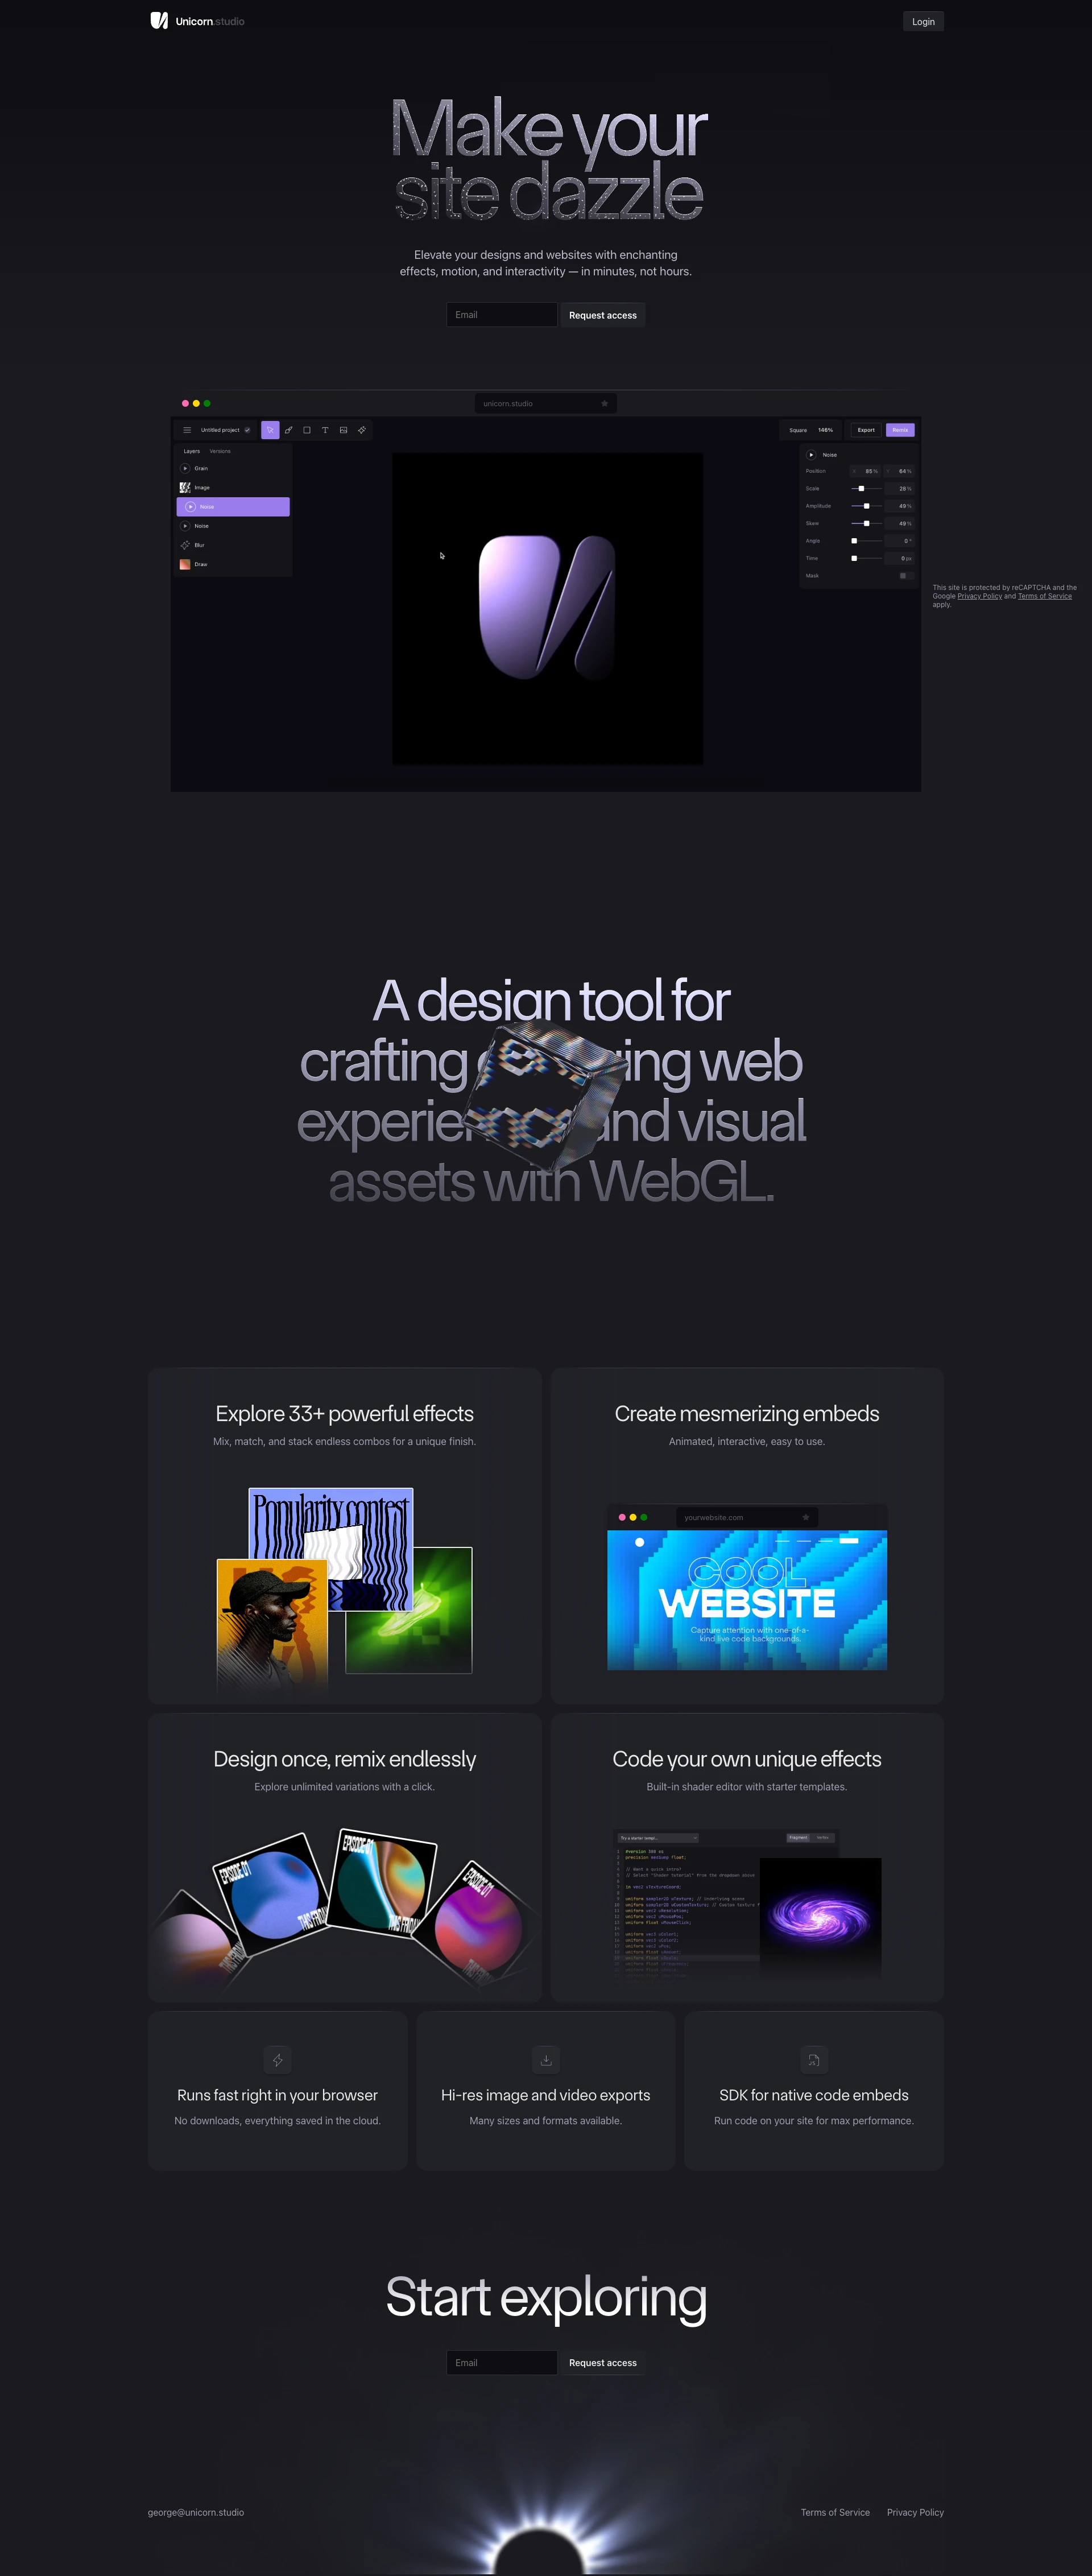 Unicorn Studio Landing Page Example: Elevate your websites with enchanting WebGL effects, motion, and interactivity — in minutes, not hours. No code neccessary, Unicorn Studio makes WebGL easy for designers.